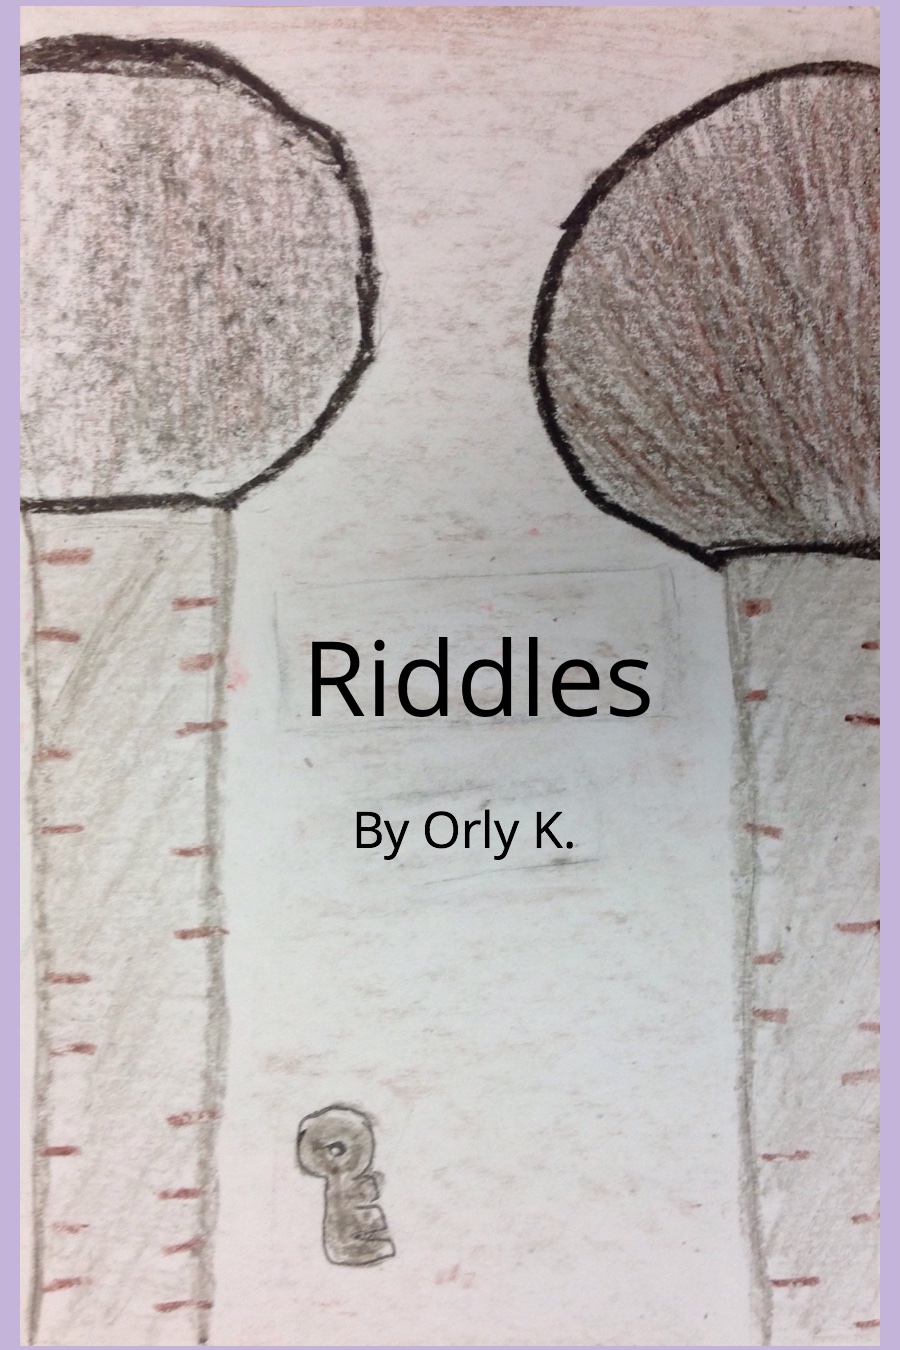 Riddles by Orly K